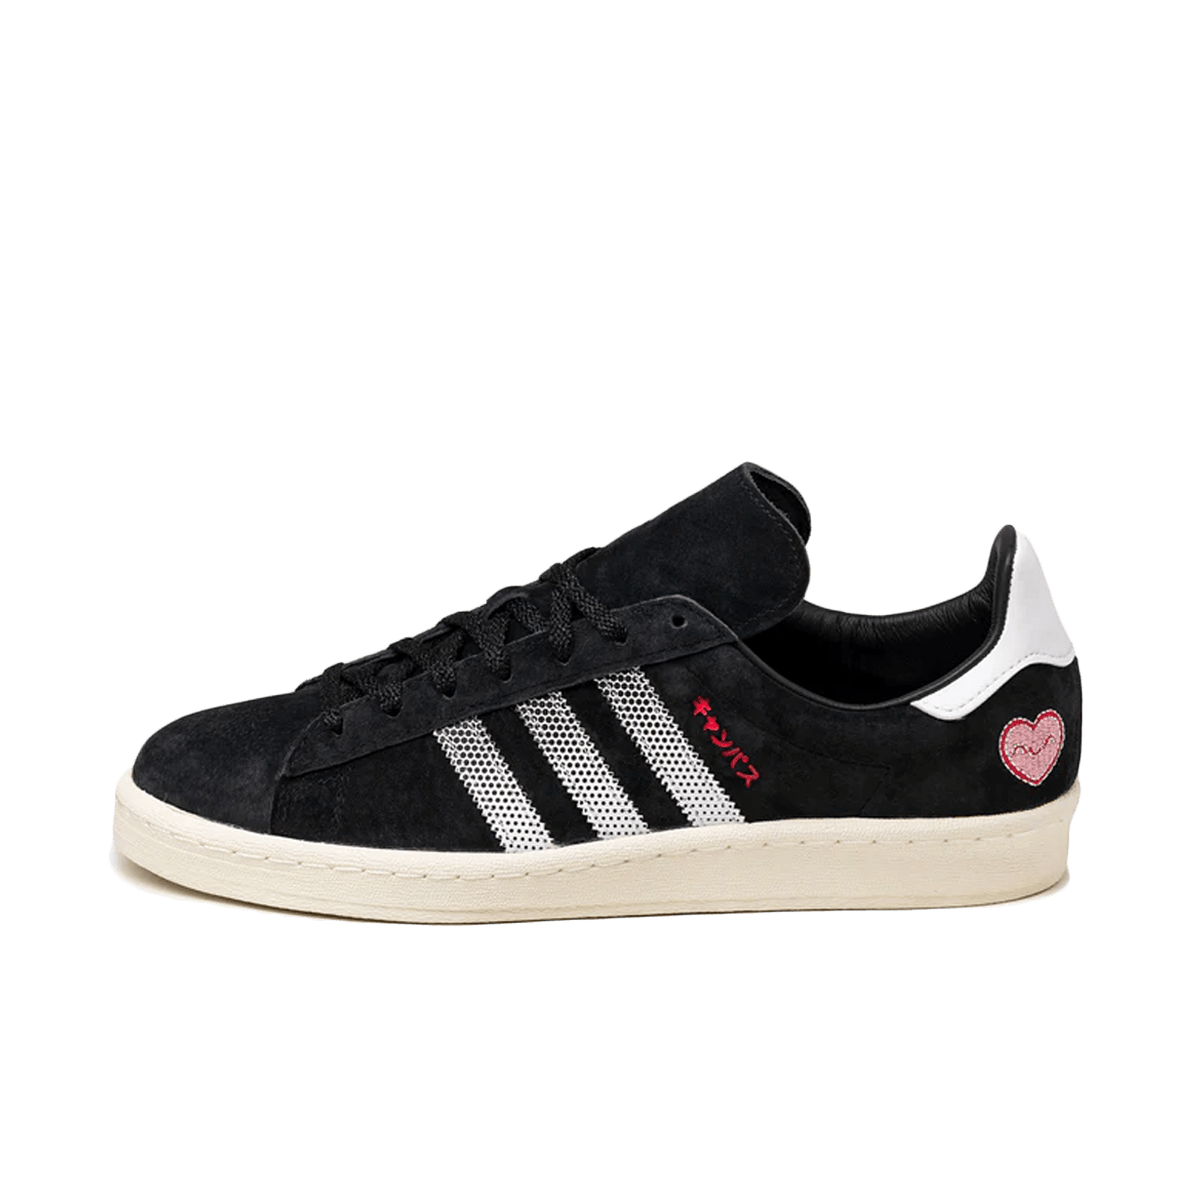 adidas Campus 80s 'Core Black' GY4586